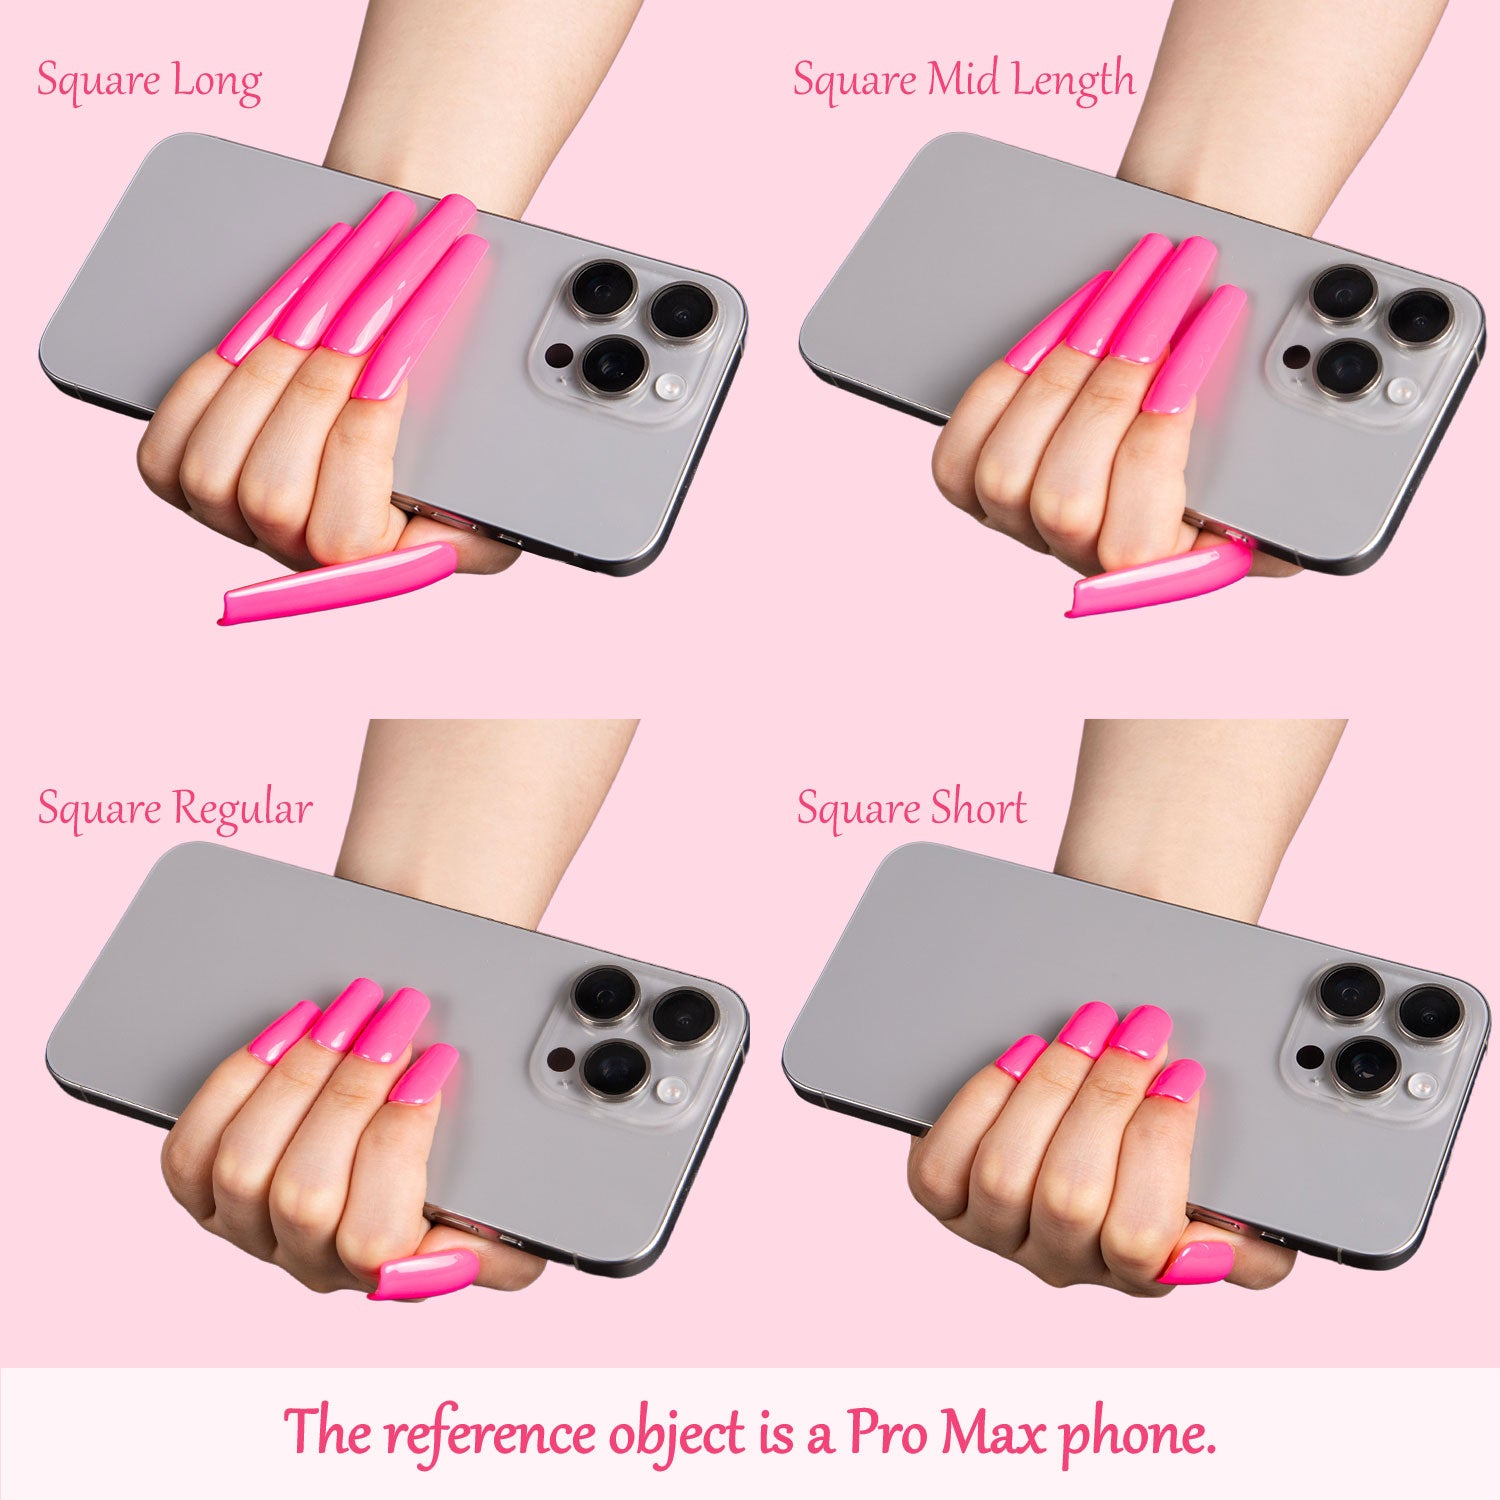 Four hands with different lengths of square-shaped pink press-on nails holding Pro Max phones, labeled Square Long, Square Mid Length, Square Regular, and Square Short. The reference object is a Pro Max phone.